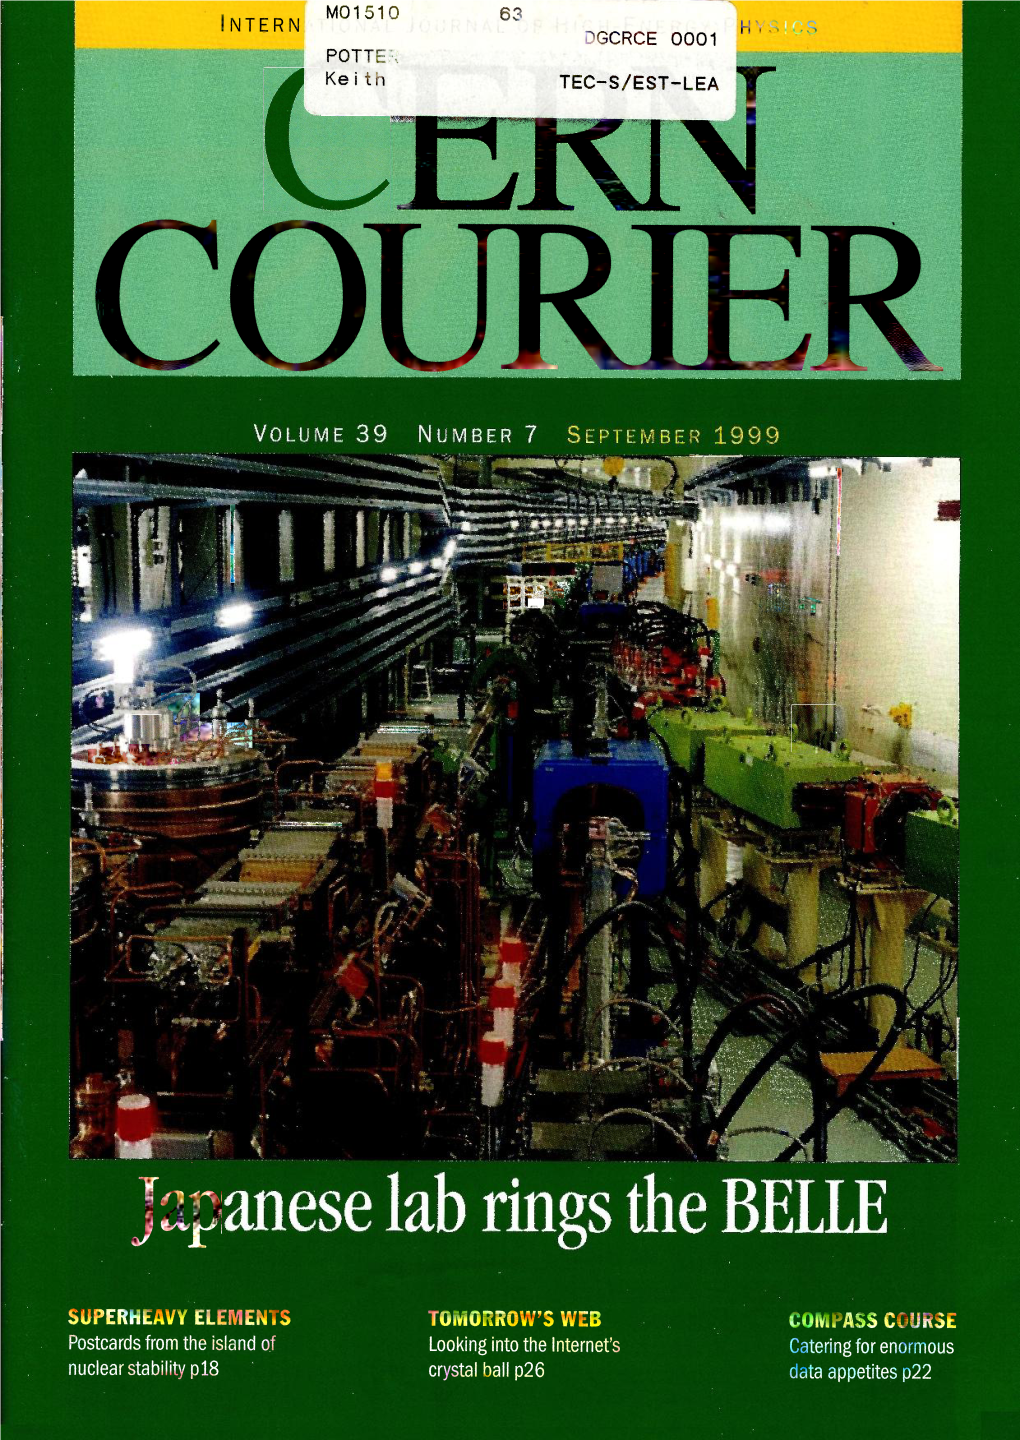 CERN Courier Is Distributed to Member State Governments, Institutes and Laboratories Affiliated with CERN, and to Their Personnel